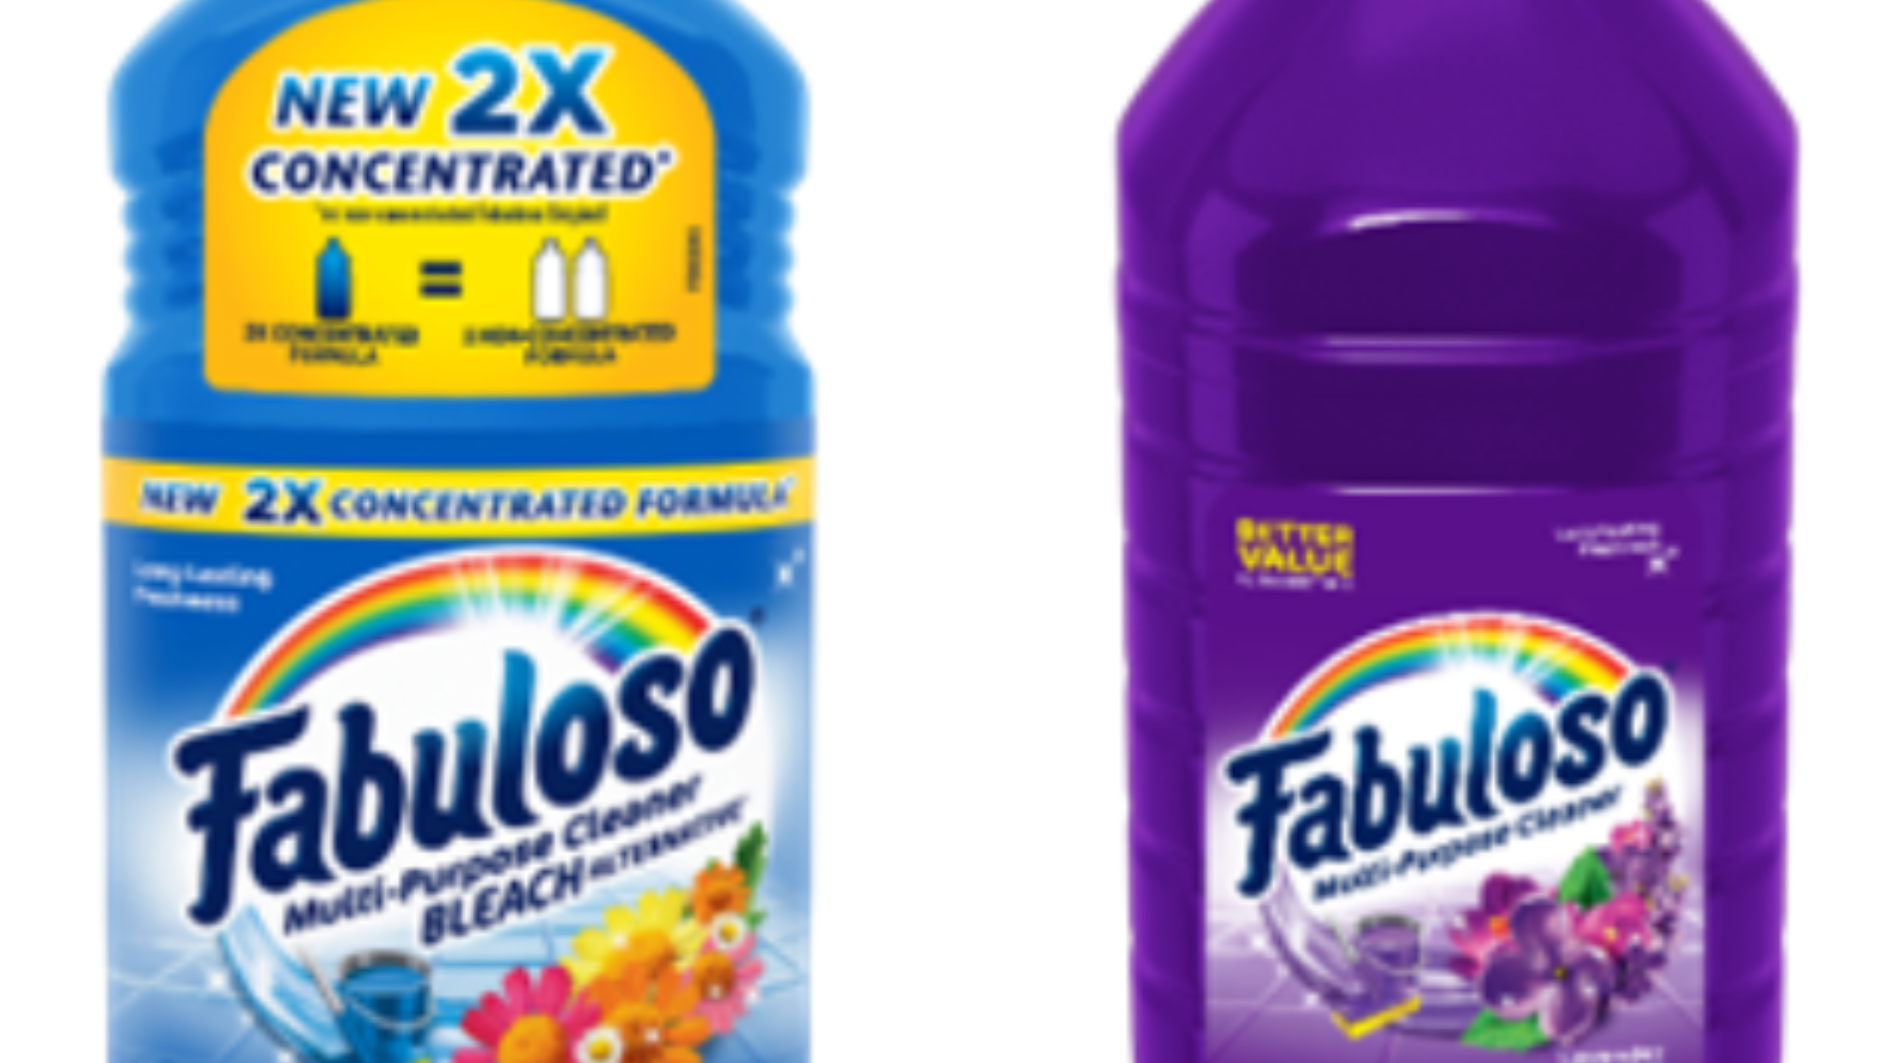 2.7 million outdoor cleaning solution products recalled for 'dislodging  nozzle